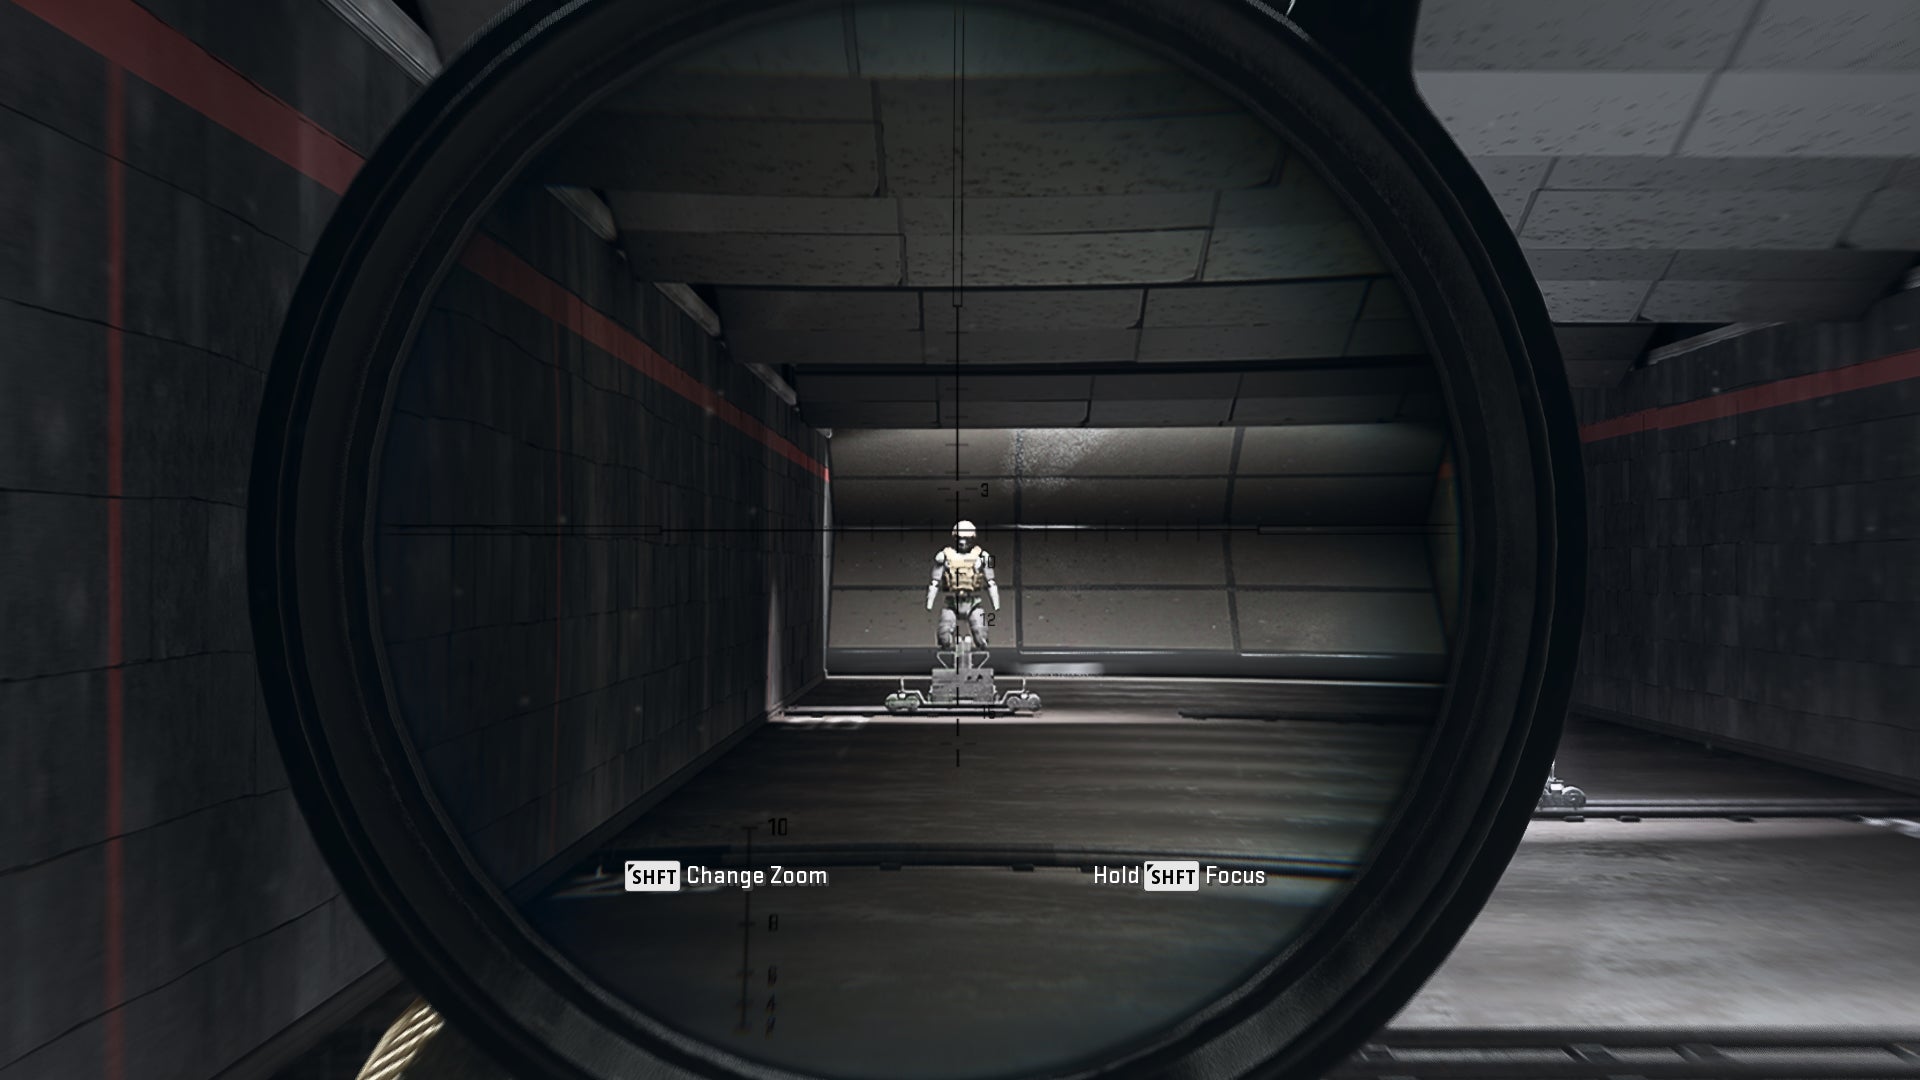 The player in Warzone 2.0 aims at a training dummy using the Corio 13X VRS optic attachment.